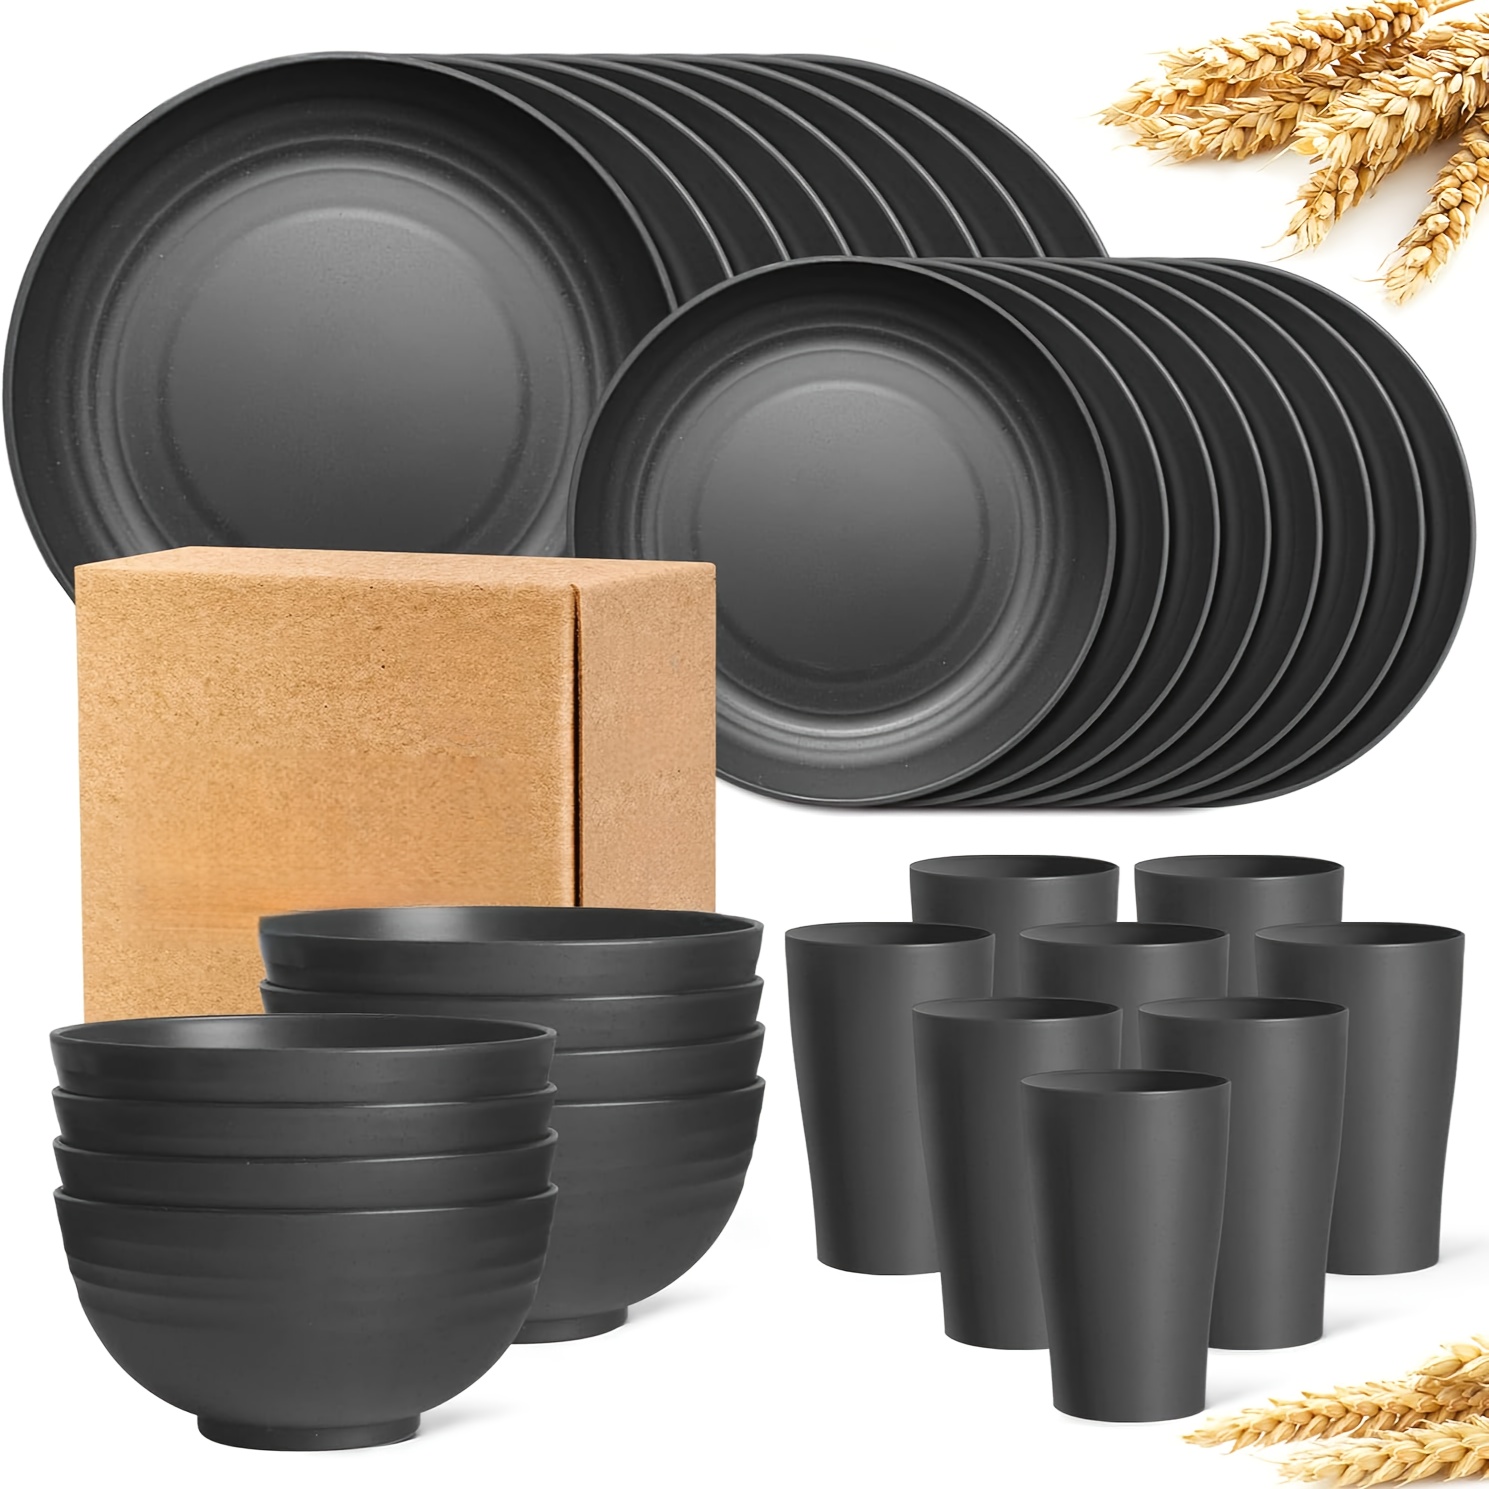 

32 Piece Kitchen Plastic Wheat Straw Tableware Set, Serving 8 People, Dining Plate, Dessert Plate, Cereal Bowl, Cup, Unbreakable Colored Plastic Outdoor Camping Tableware, Black